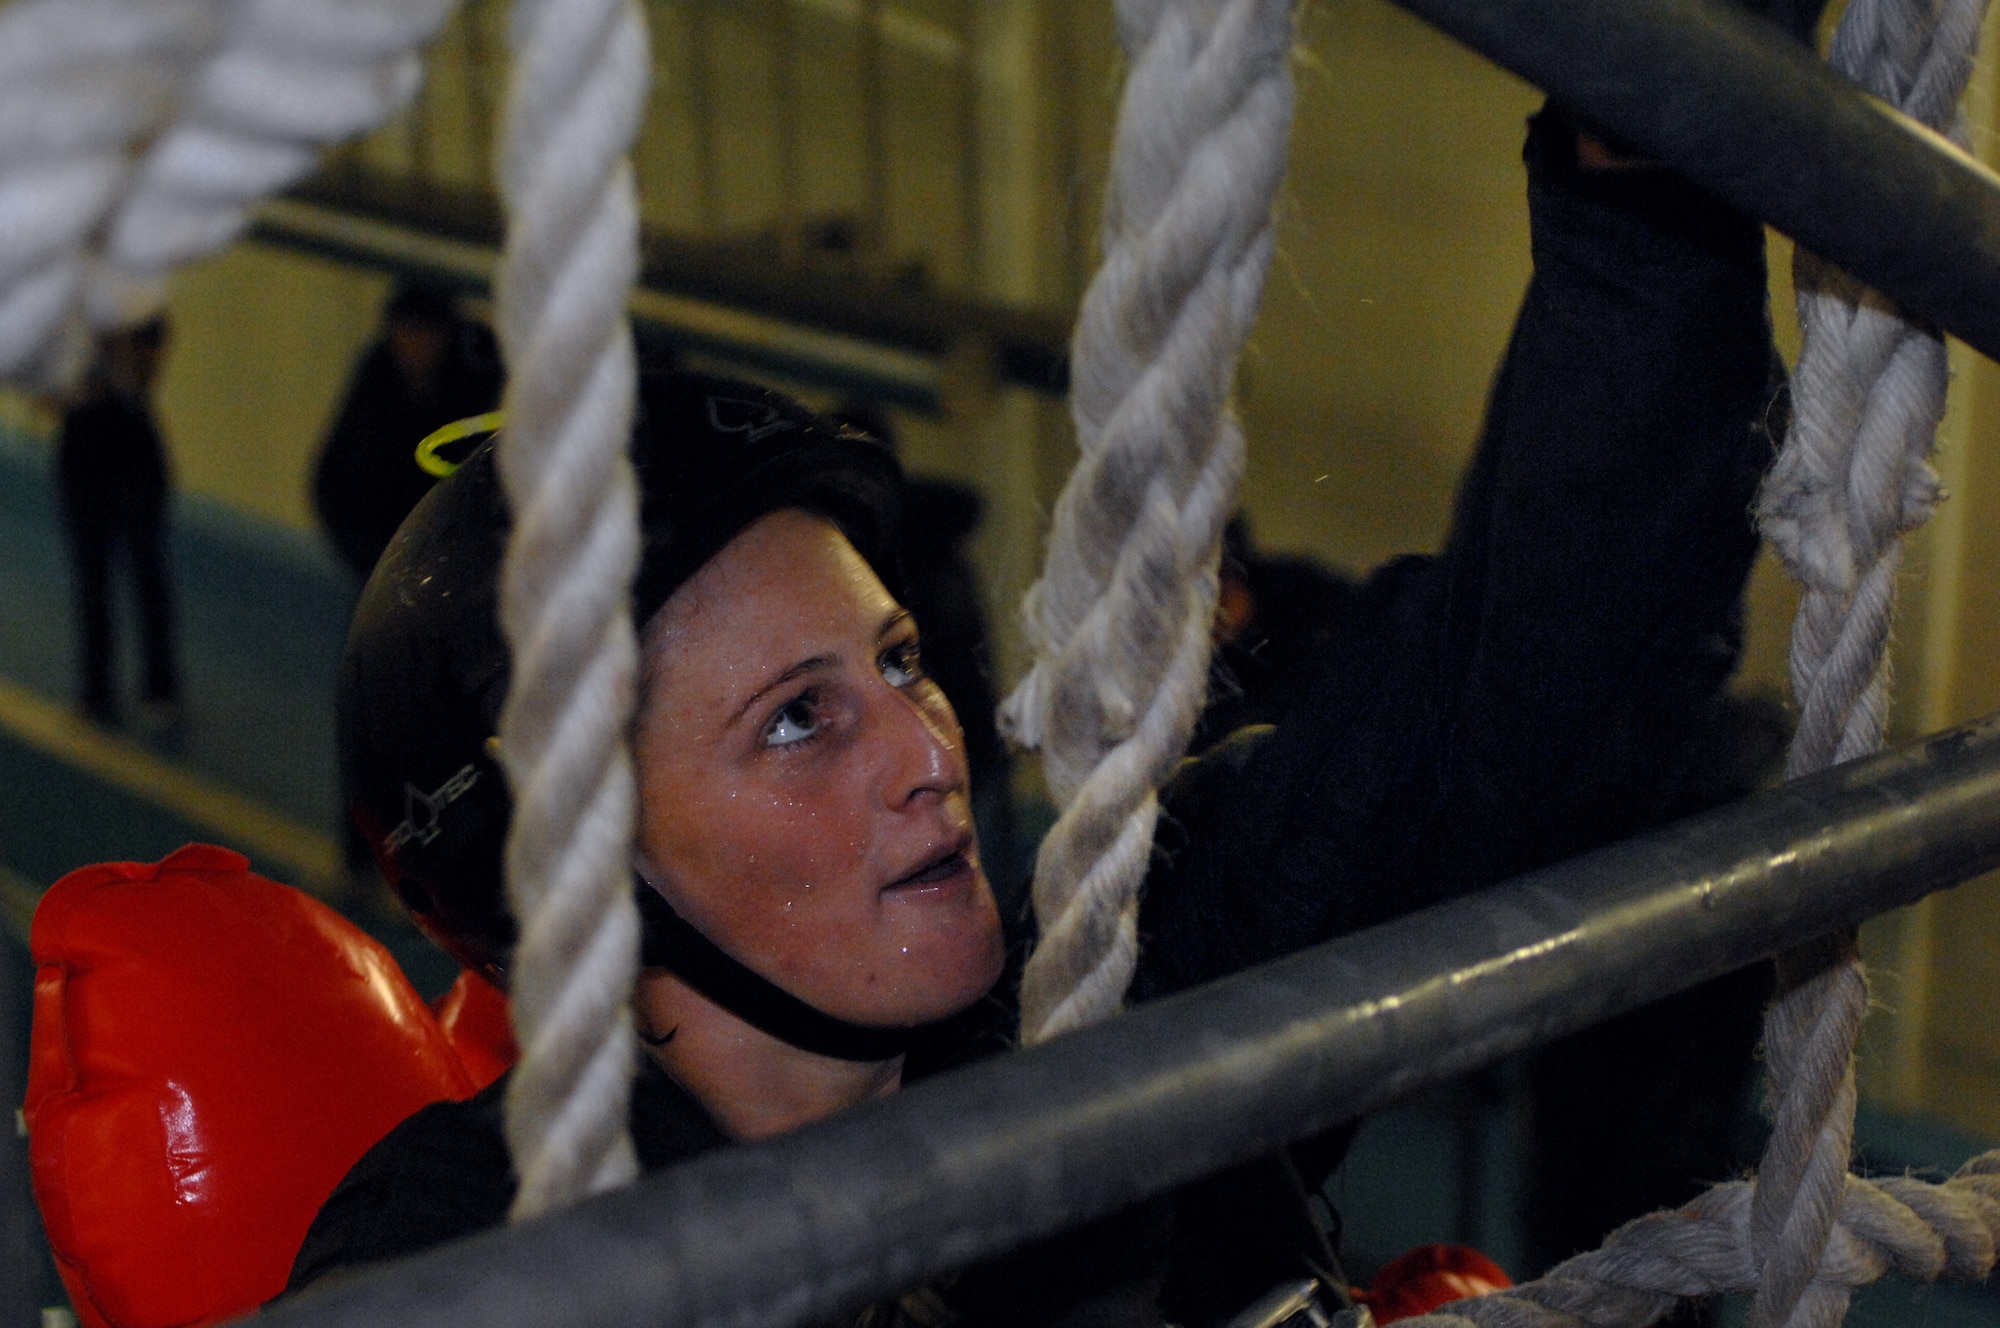 Captain Dawn Hildebrand 351st Air Refueling Squadron, climbs a rope ladder during a water survival refresh course held at Lowestoft College, Maritime and Offshore Facilities. During the water survival training students are hit with 5-foot waves, pounding rain and brutal winds – all while soaking in valuable information crucial to keeping them alive. (U.S. Air Force photo by Senior Airman Teresa M. Hawkins)